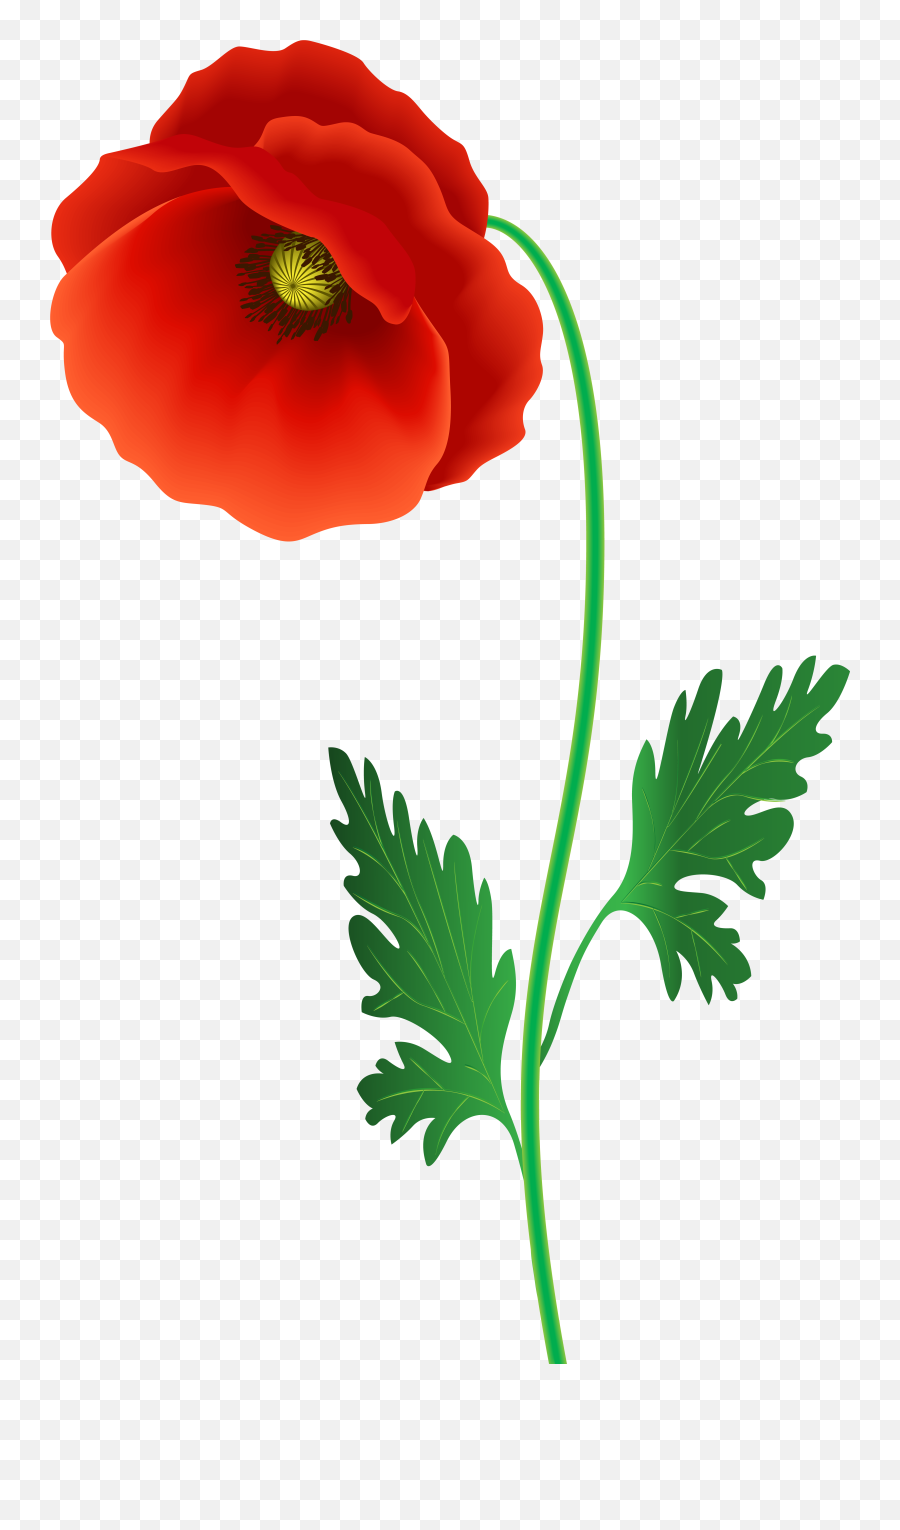 Download Free Png Poppy Flower Clipart Image Gallery - Flowering Plant,Flowers Clipart Png